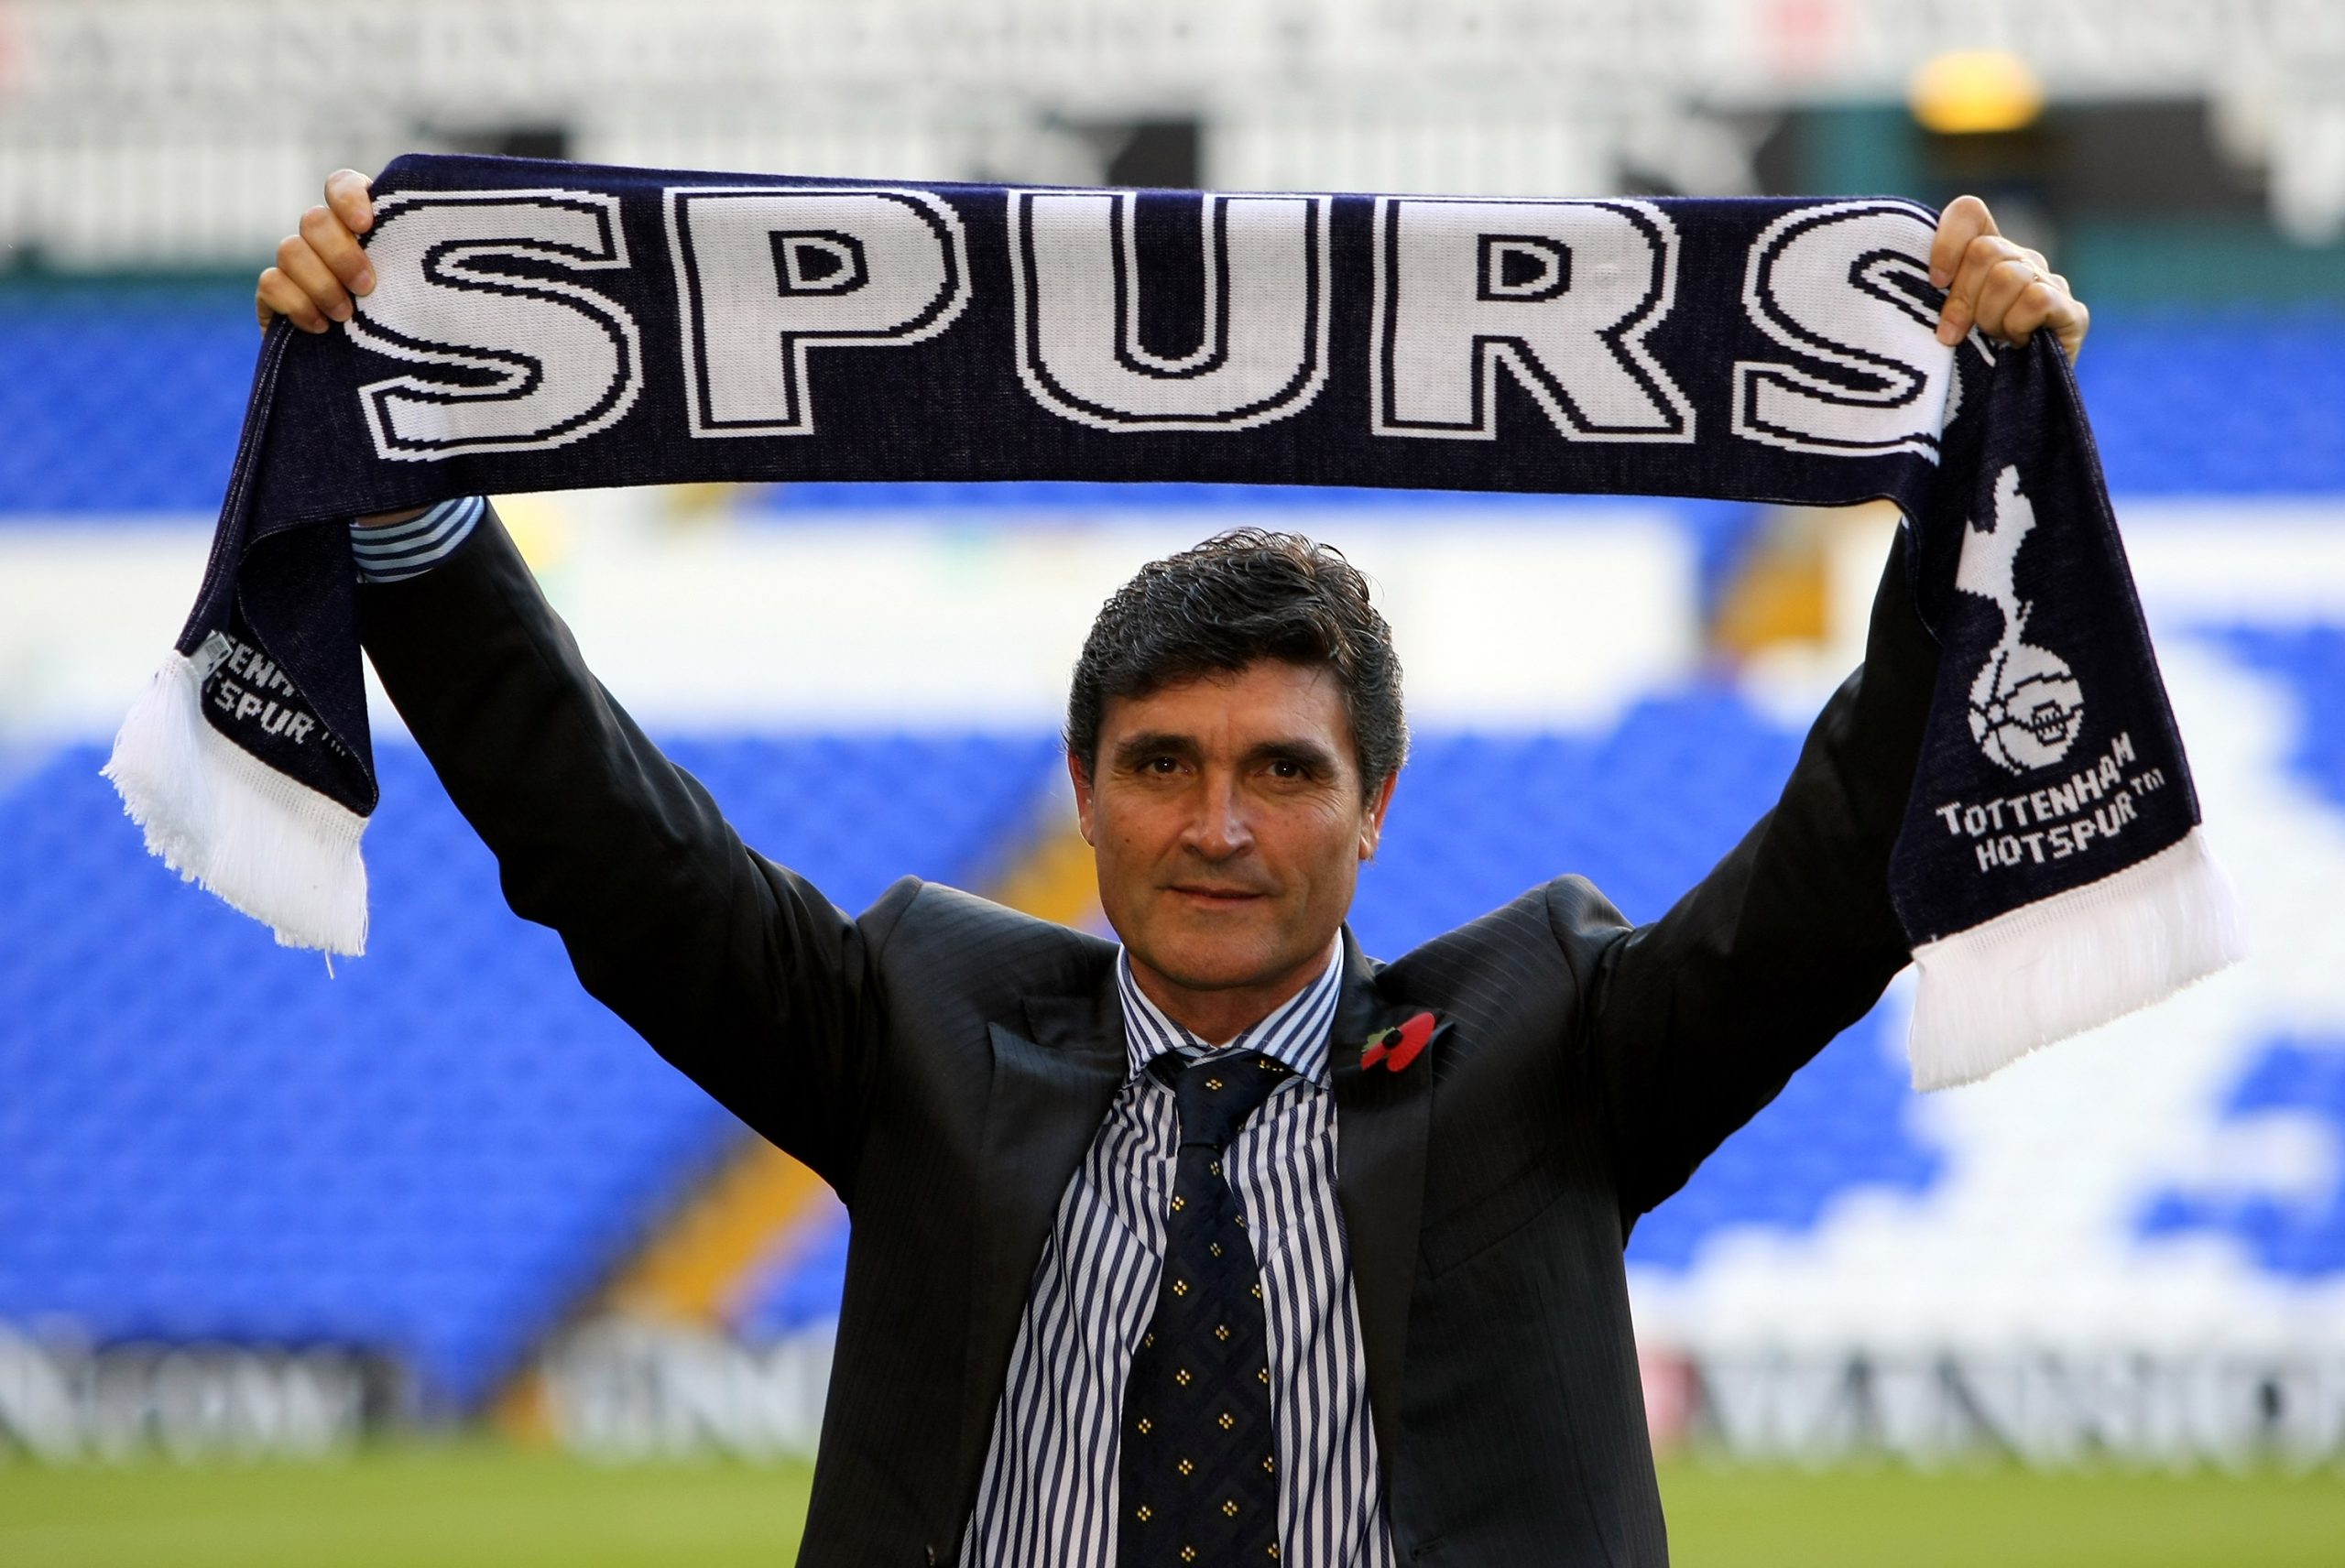 Juande Ramos won the League Cup with Tottenham in 2008 (Richard Heathcote/Getty Images)